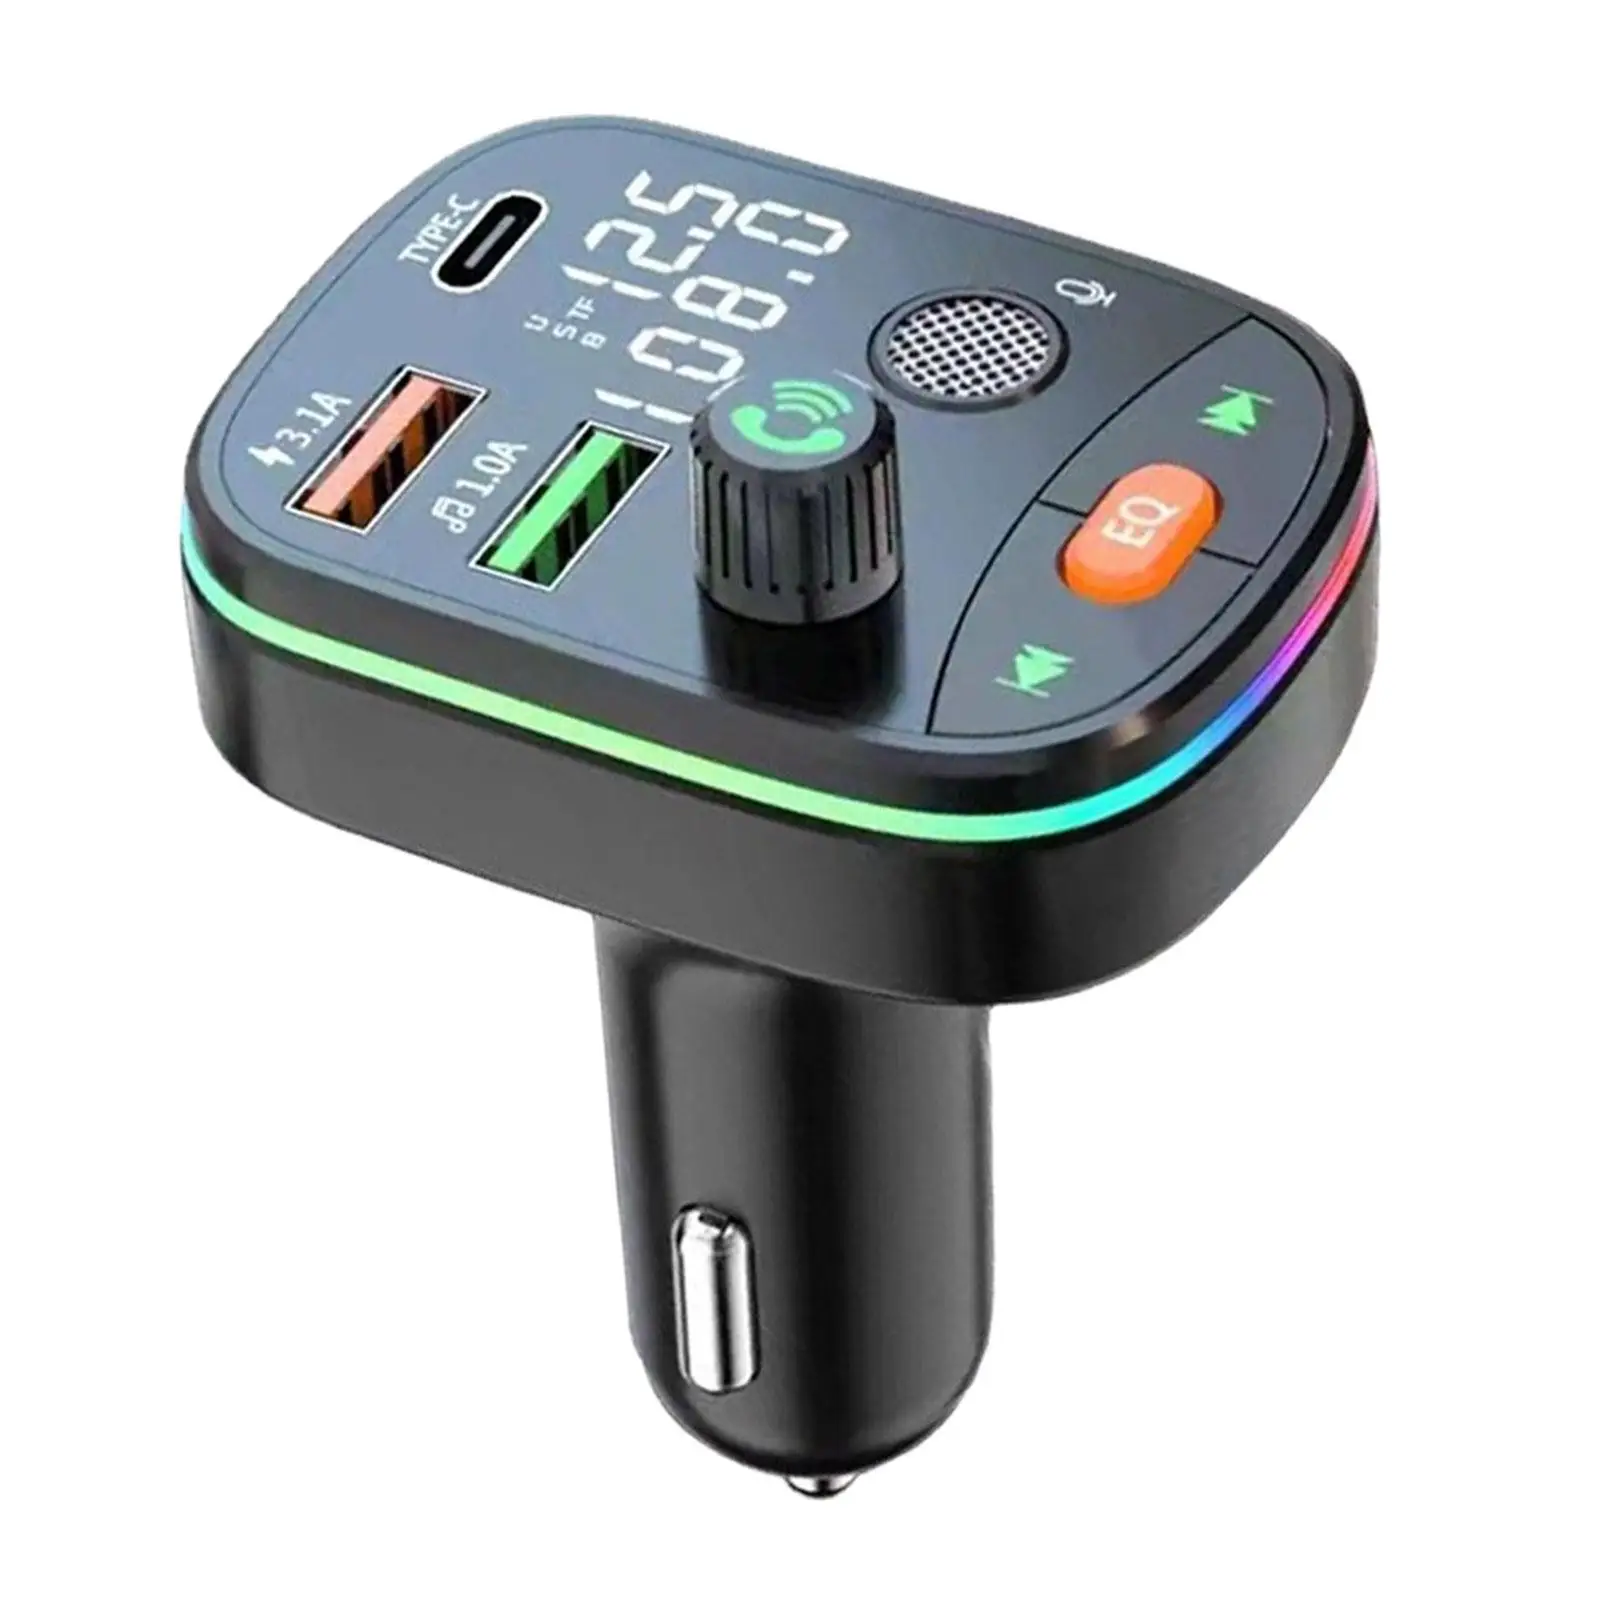 Bluetooth FM Transmitter Handsfree Calling Music Player 80x57x42mm Easy to Use